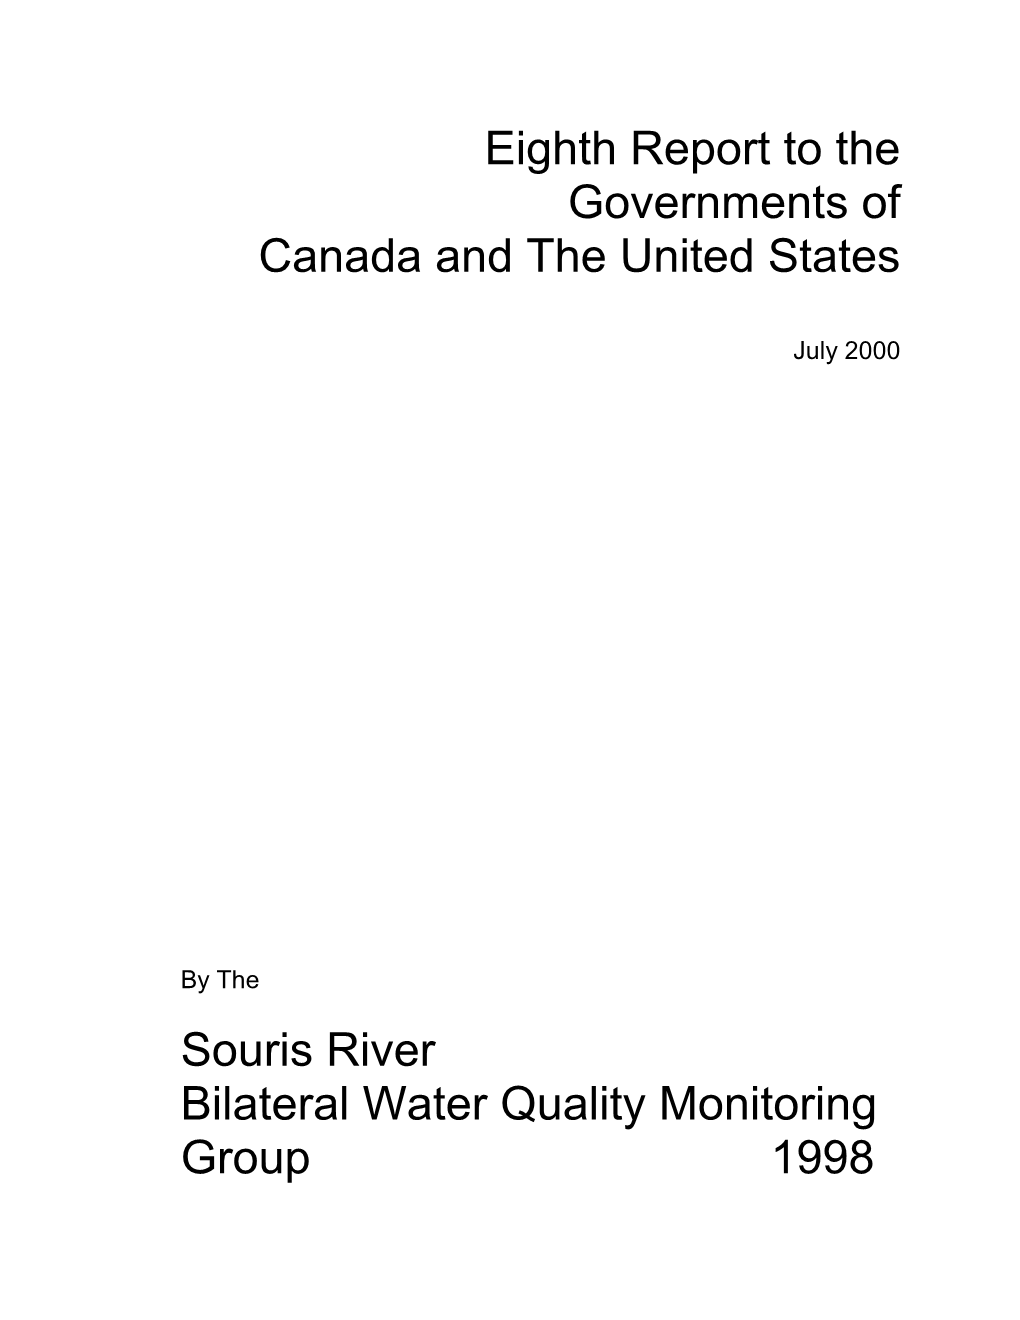 Souris River Bilateral Water Quality Monitoring Group 1998 EIGHTH REPORT to the GOVERNMENTS of the UNITED STATES and CANADA